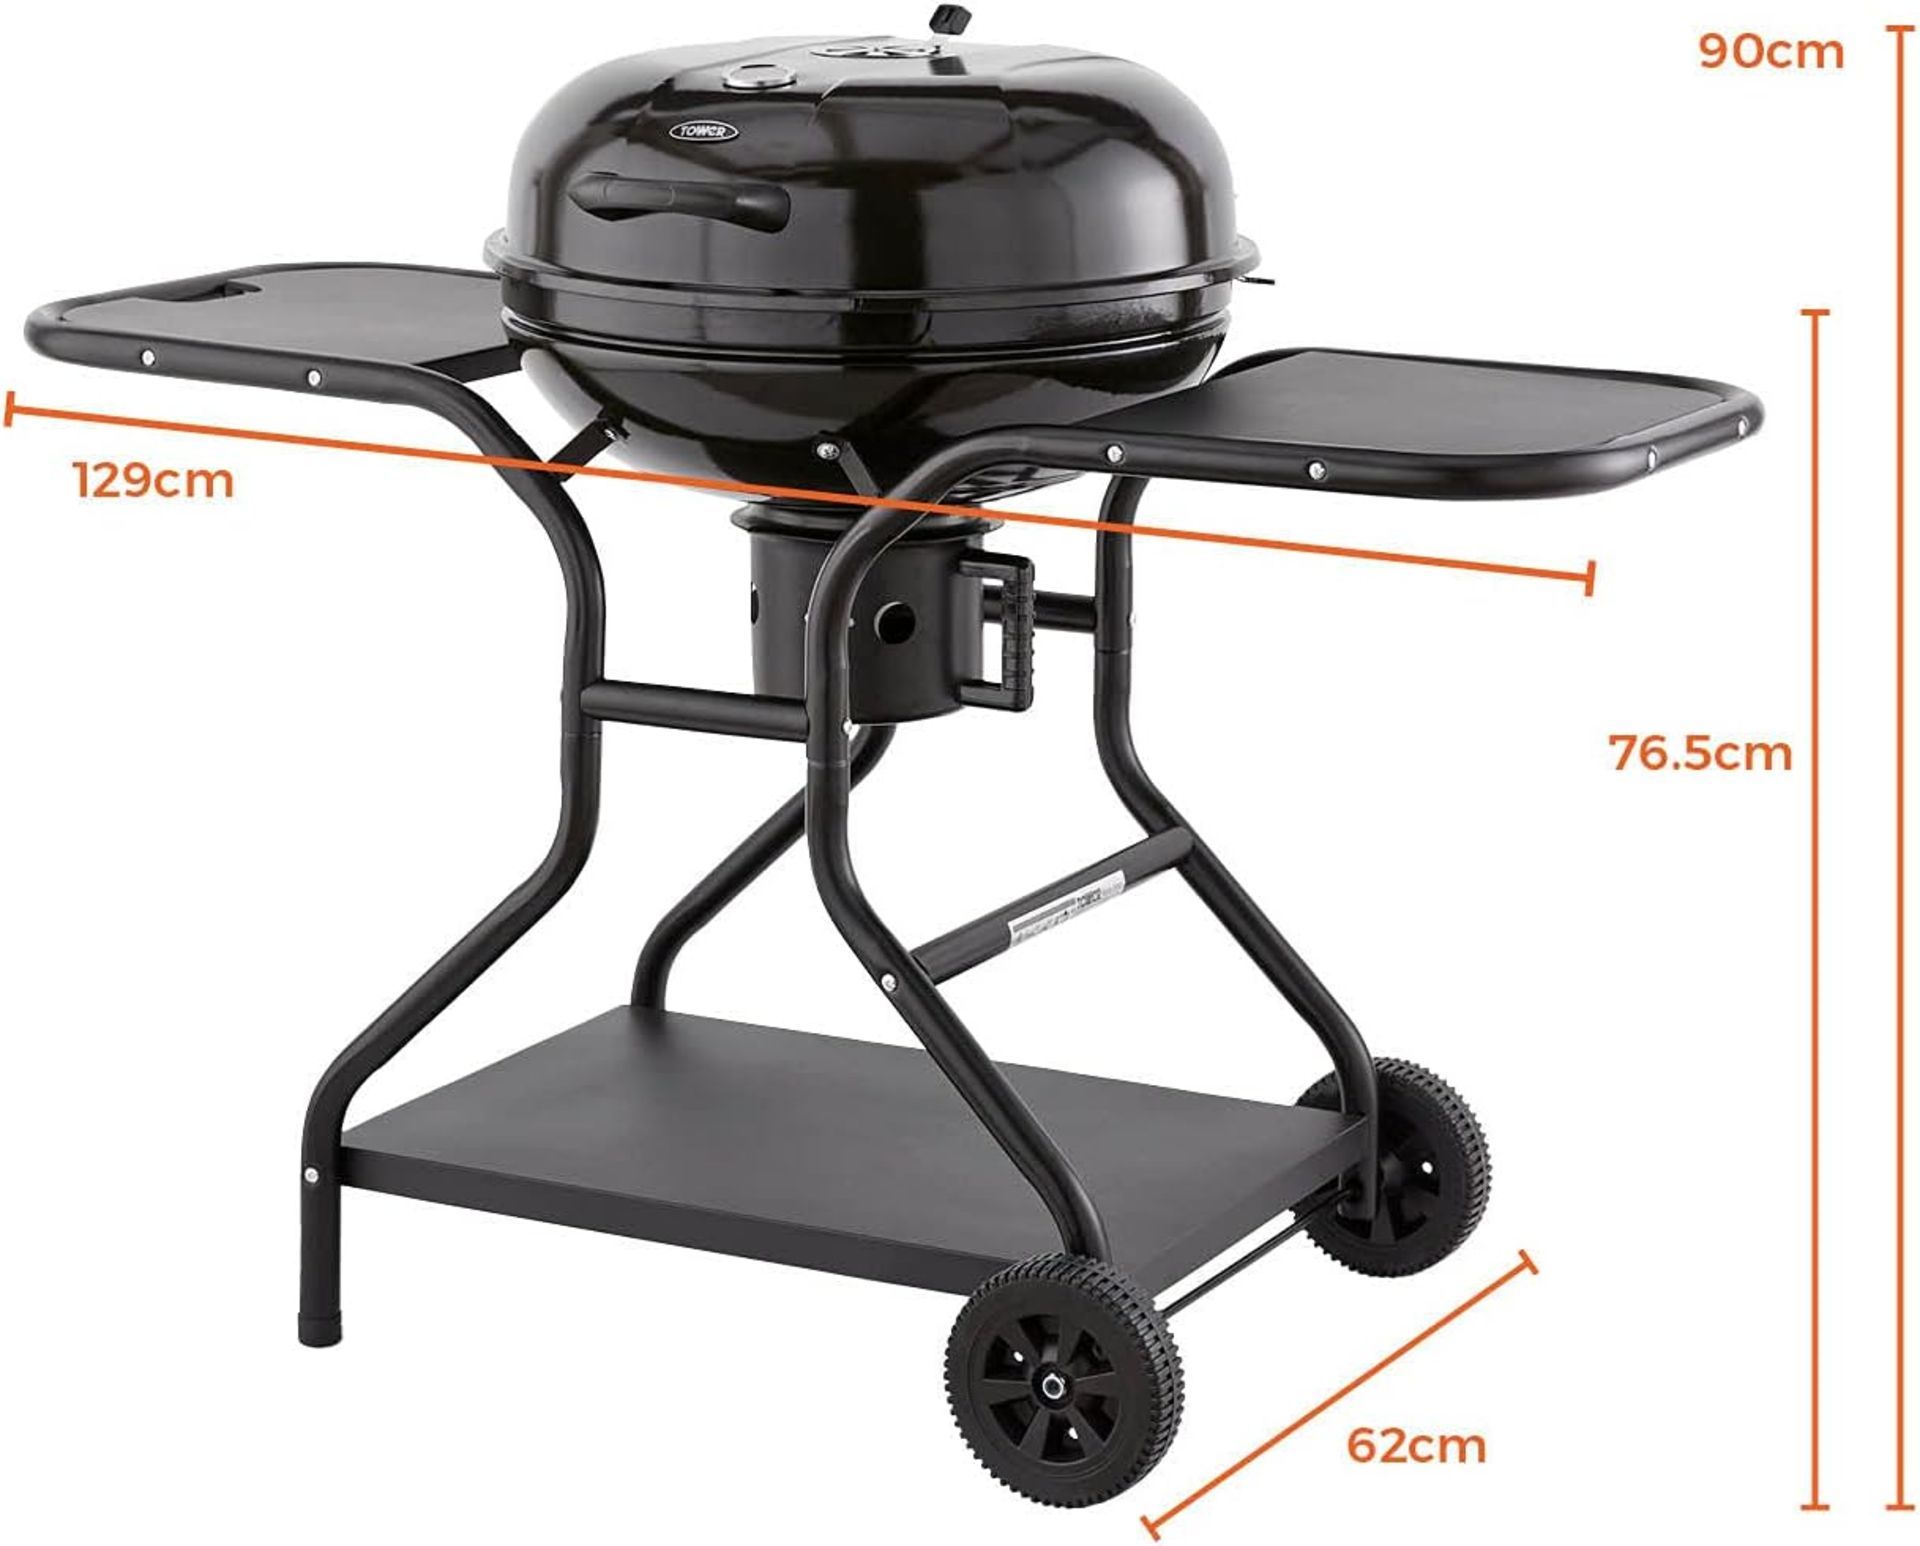 BRAND NEW TOWER Charcoal BBQ Grill With Tables. RRP £179.99 EACH. Grill some delicious ingredients - Image 4 of 4